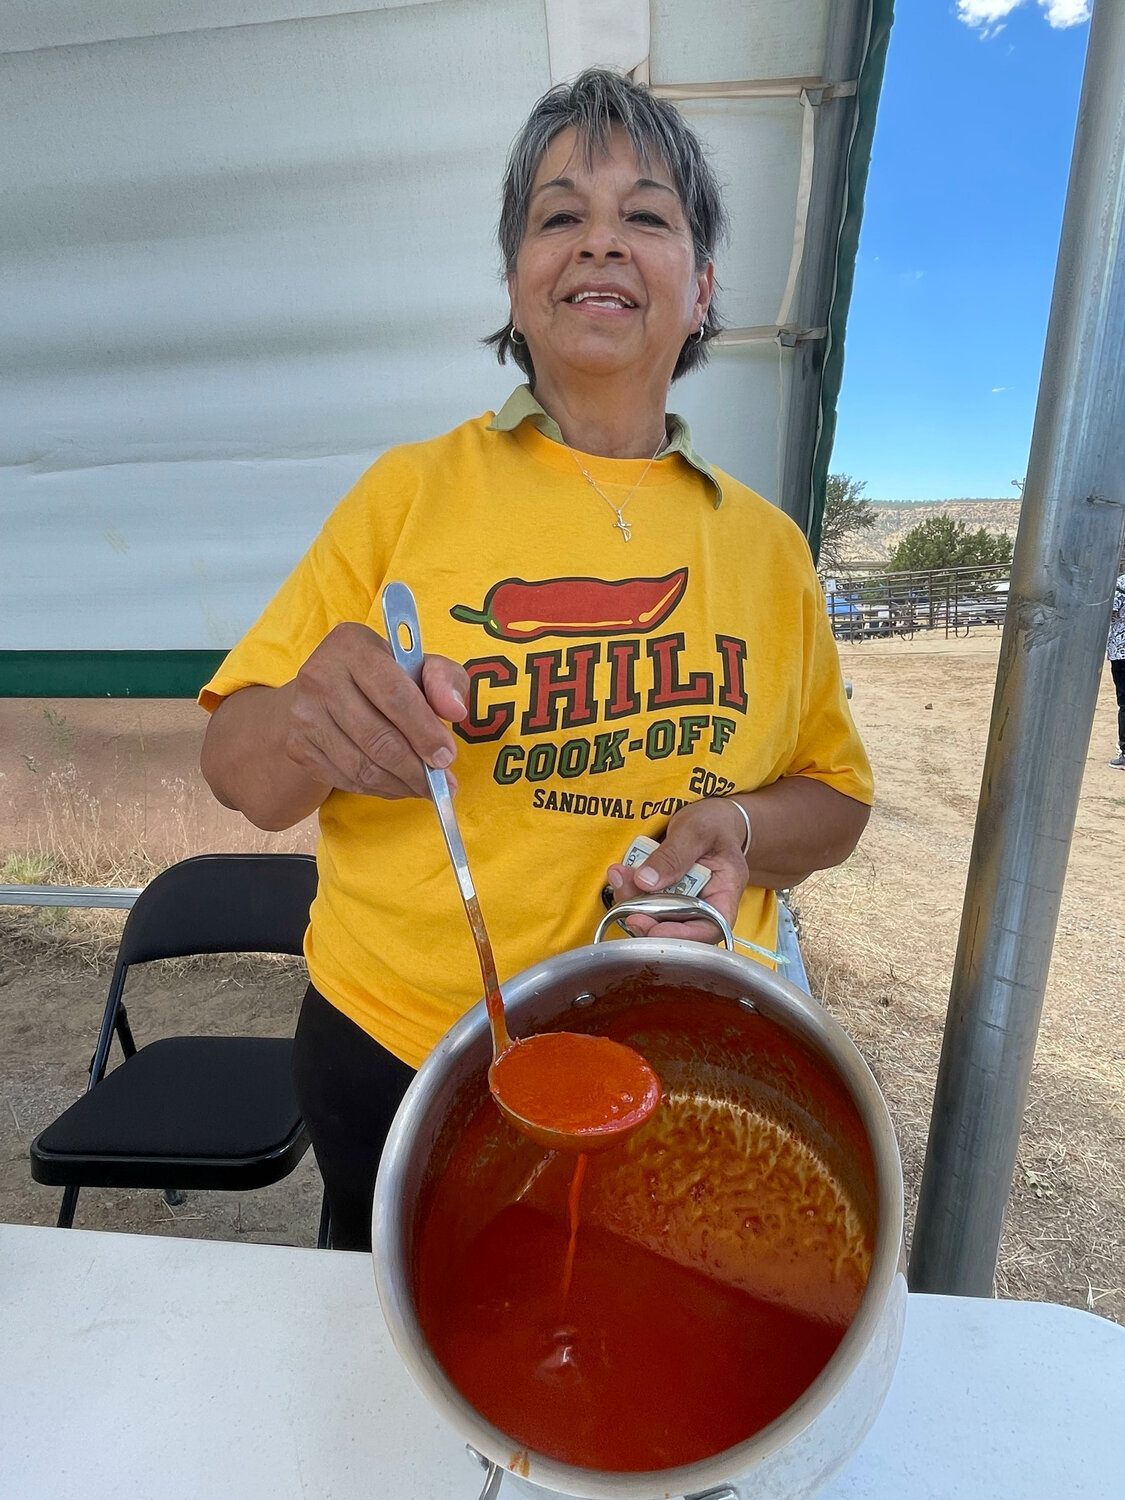 Eloyda Romero, of Cuba, shows off what's left over of her award-winning chili. She won chili cookoff at this year's Sandoval County Fair, the first time the event was held at the fair. She used pork, red chile pods, garlic cloves and a secret ingredient to win the title.